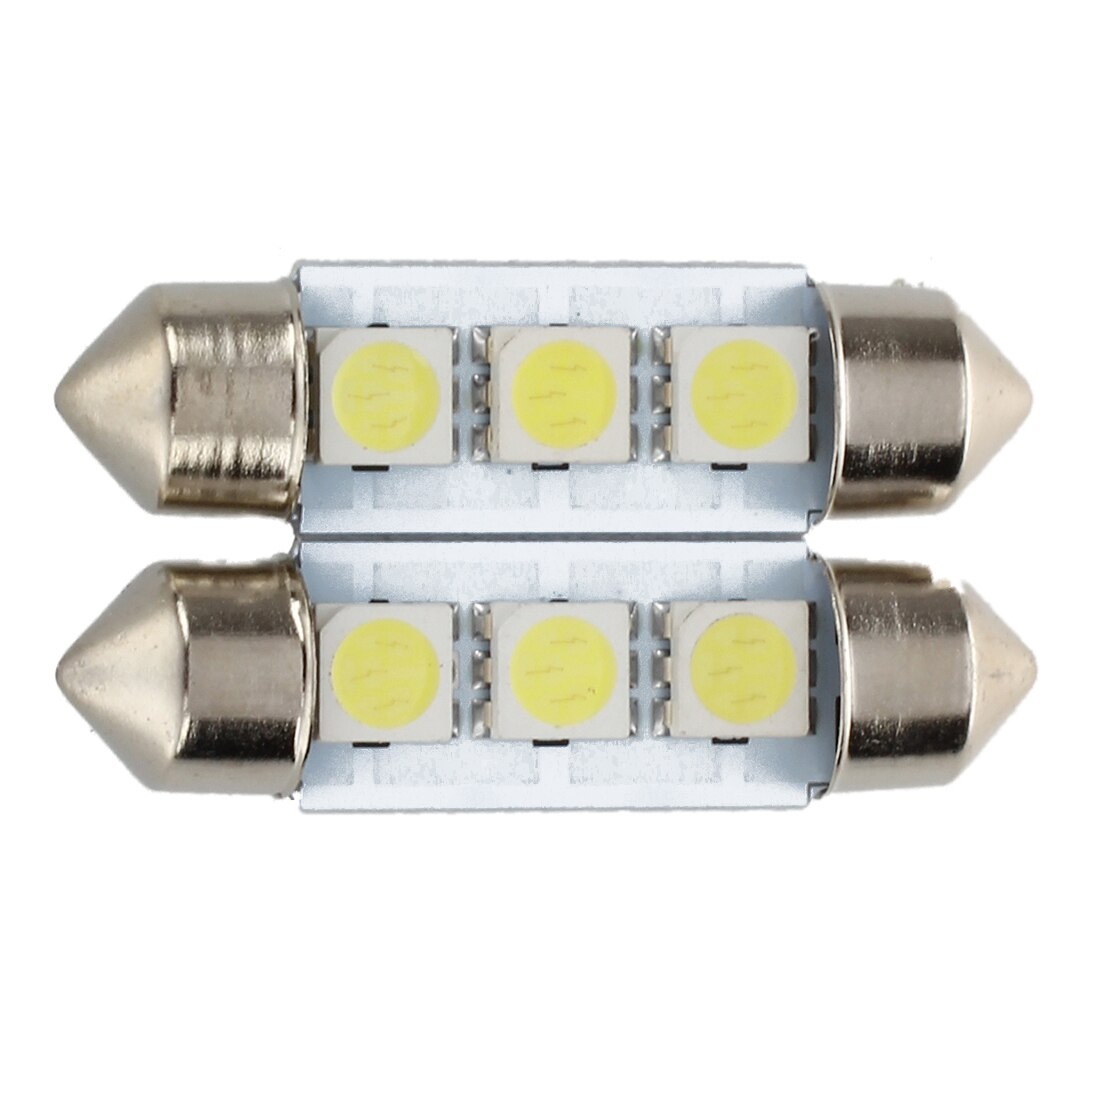 2x C5W 3 Led Smd 5050 34Mm Xenon Witte Lamp Plaat Shuttle Slingers Koepel Plafond Lamp Auto Licht